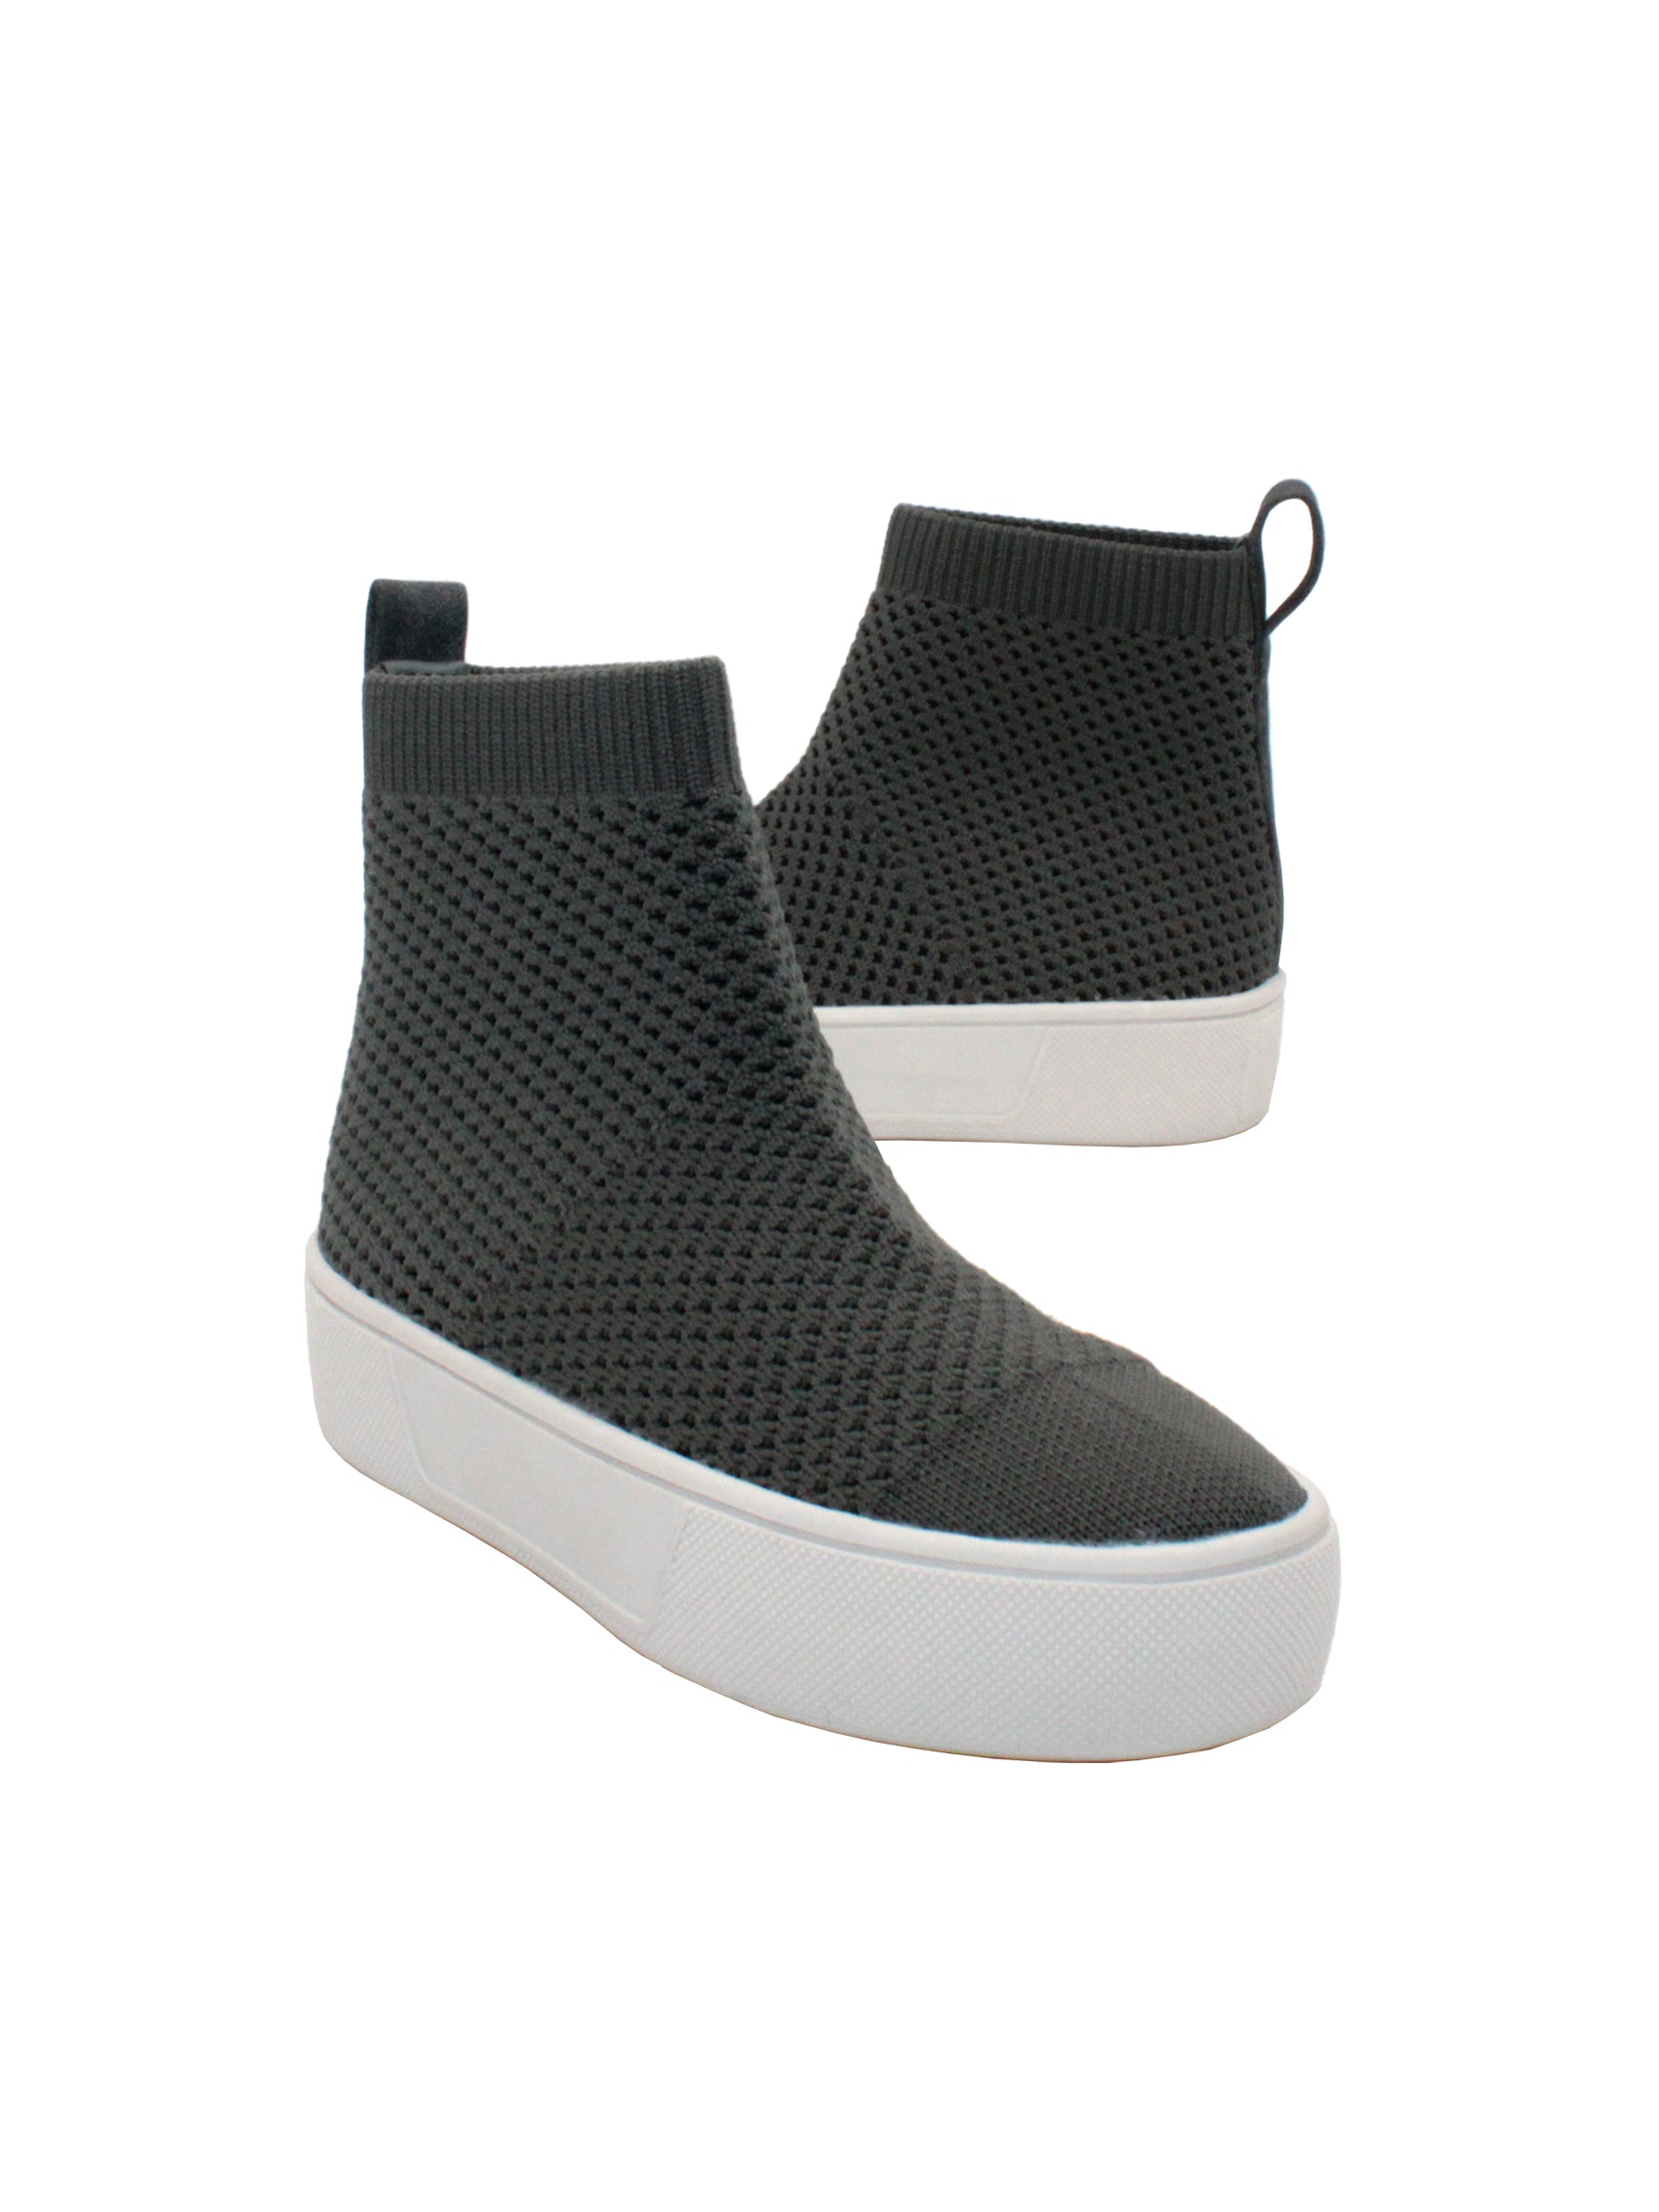 Stretch knit upper with back pull tab Stretch knit lining Internal nylon zipper Slip-on bootie sneaker style Signature ultra comfort EVA insole Approx. 3.5” shaft height Textured rubber sneaker bottom CHARCOAL